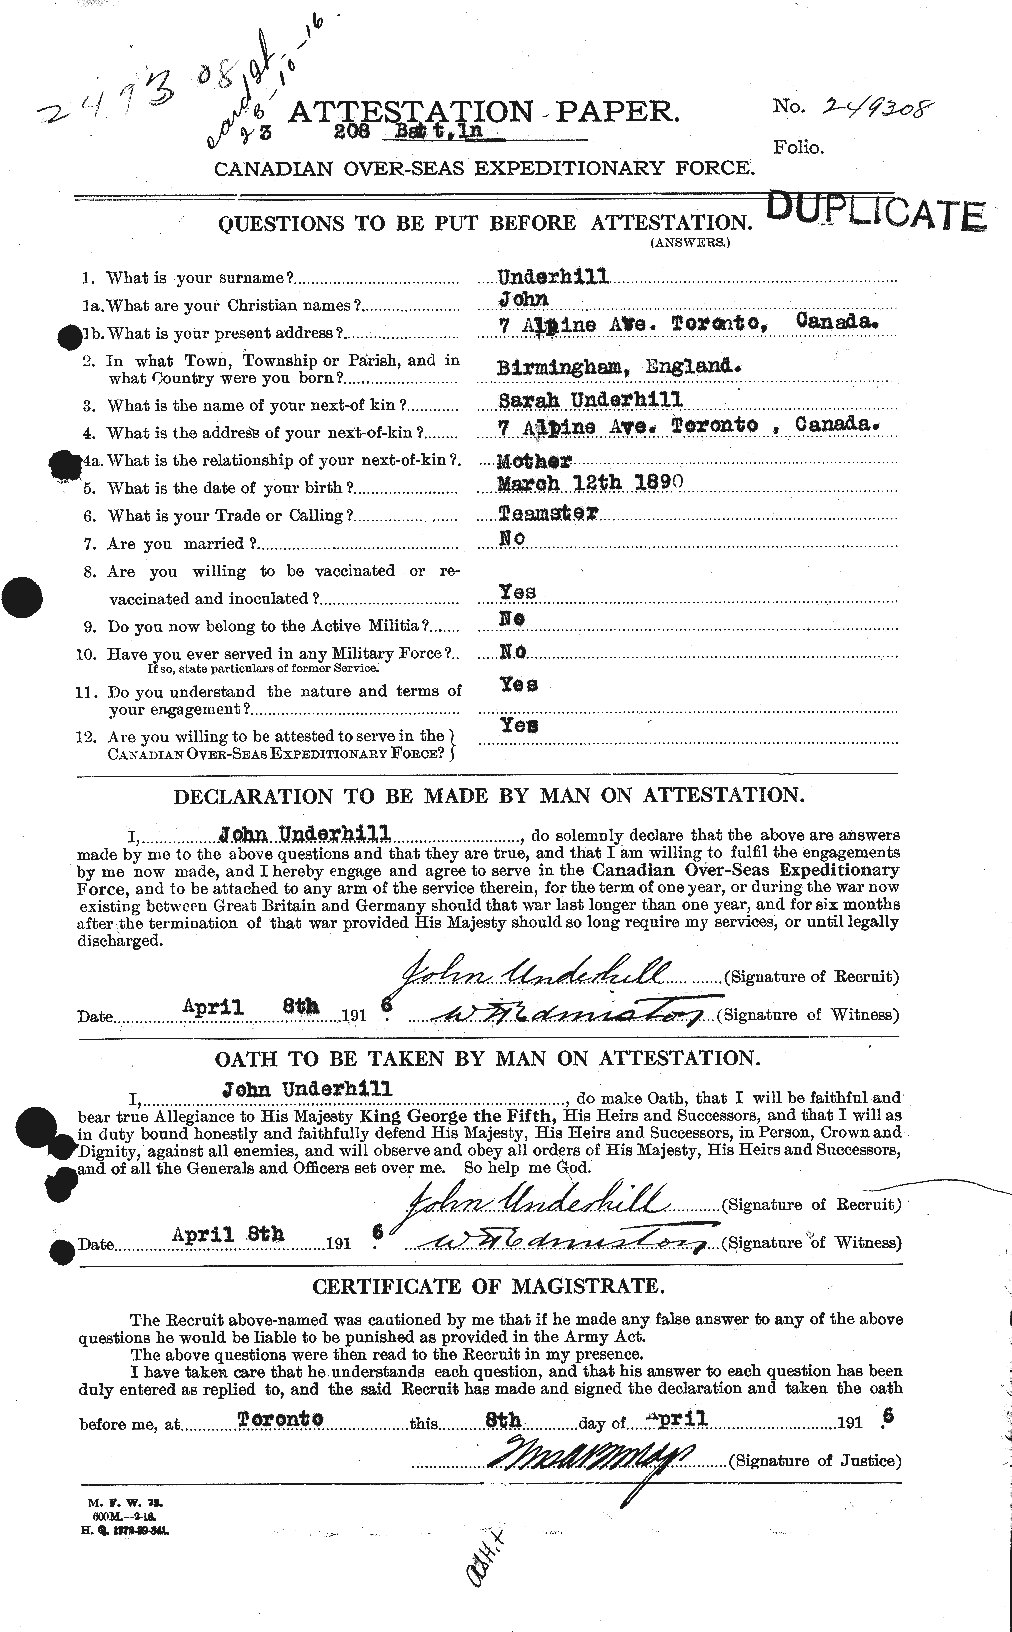 Personnel Records of the First World War - CEF 647104a